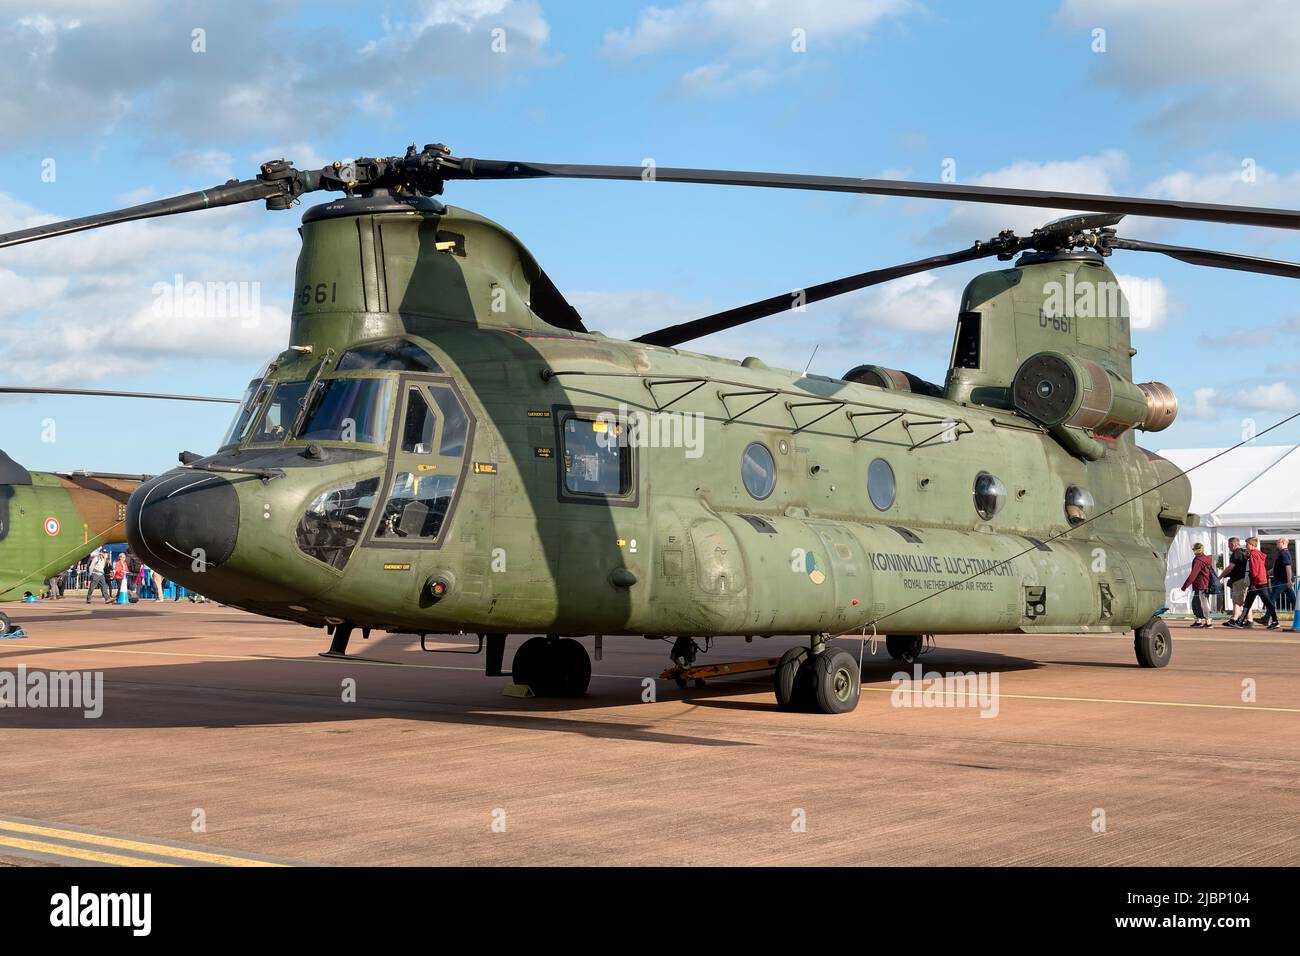 Fairford, Gloucestershire, Regno Unito - Luglio 2019: No 298 Squadron Royal Netherlands Air Force (Koninklijke Luchtmacht) CH-47D Chinook elicottero pesante (. Foto Stock